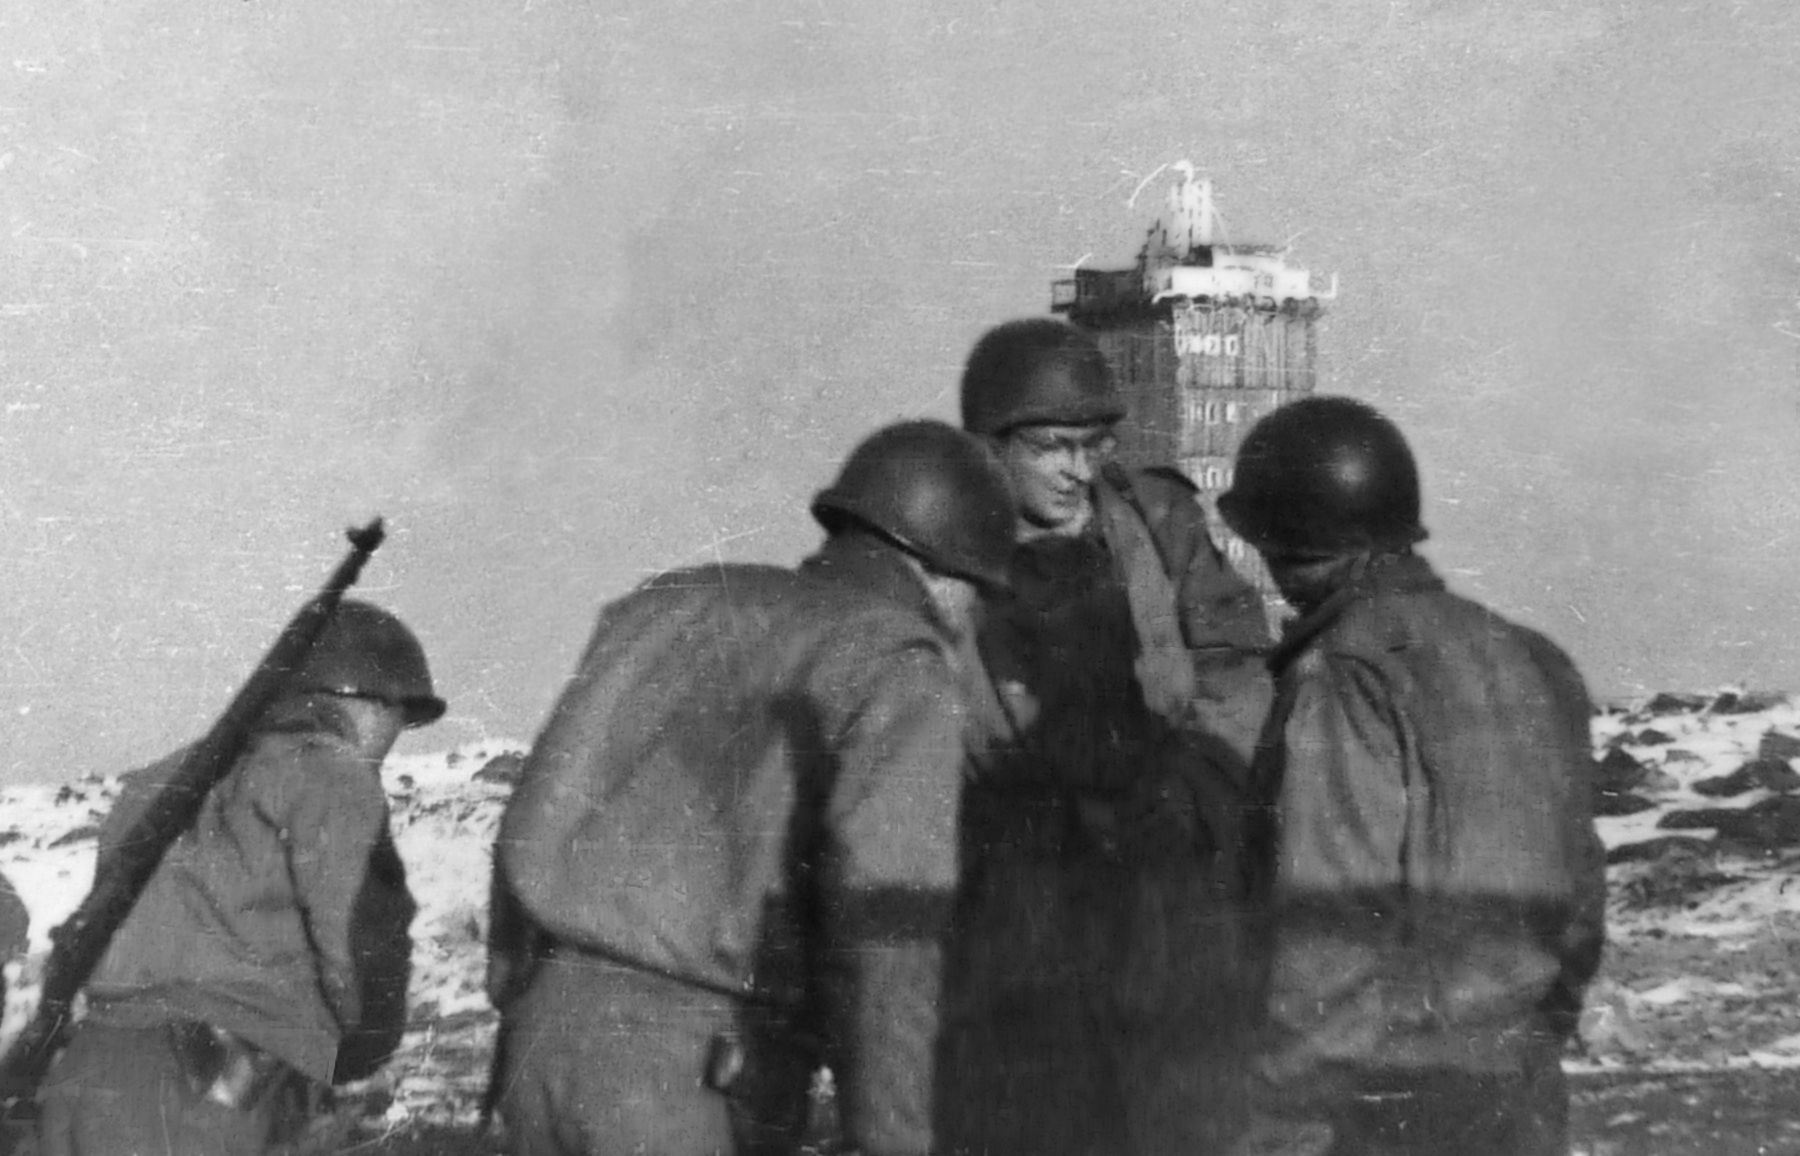 Troops of the 809th gather near the weather station tower (background) atop Brocken Peak, May 1, 1945. (The weather station is near the world’s first television transmission and radar tower, built in 1935; it transmitted broadcasts of the 1936 Summer Olympics from Berlin.) The capture of the peak was one of the last battles of the war in the ETO, and was the last combat action for the battalion. Brocken Peak is the highest point in the Harz Mountains (north-central Germany) at an elevation of 3,743 feet. Although other installations on the peak were destroyed in an April 17 Allied bombing raid, the tower survived intact and remains there today. 